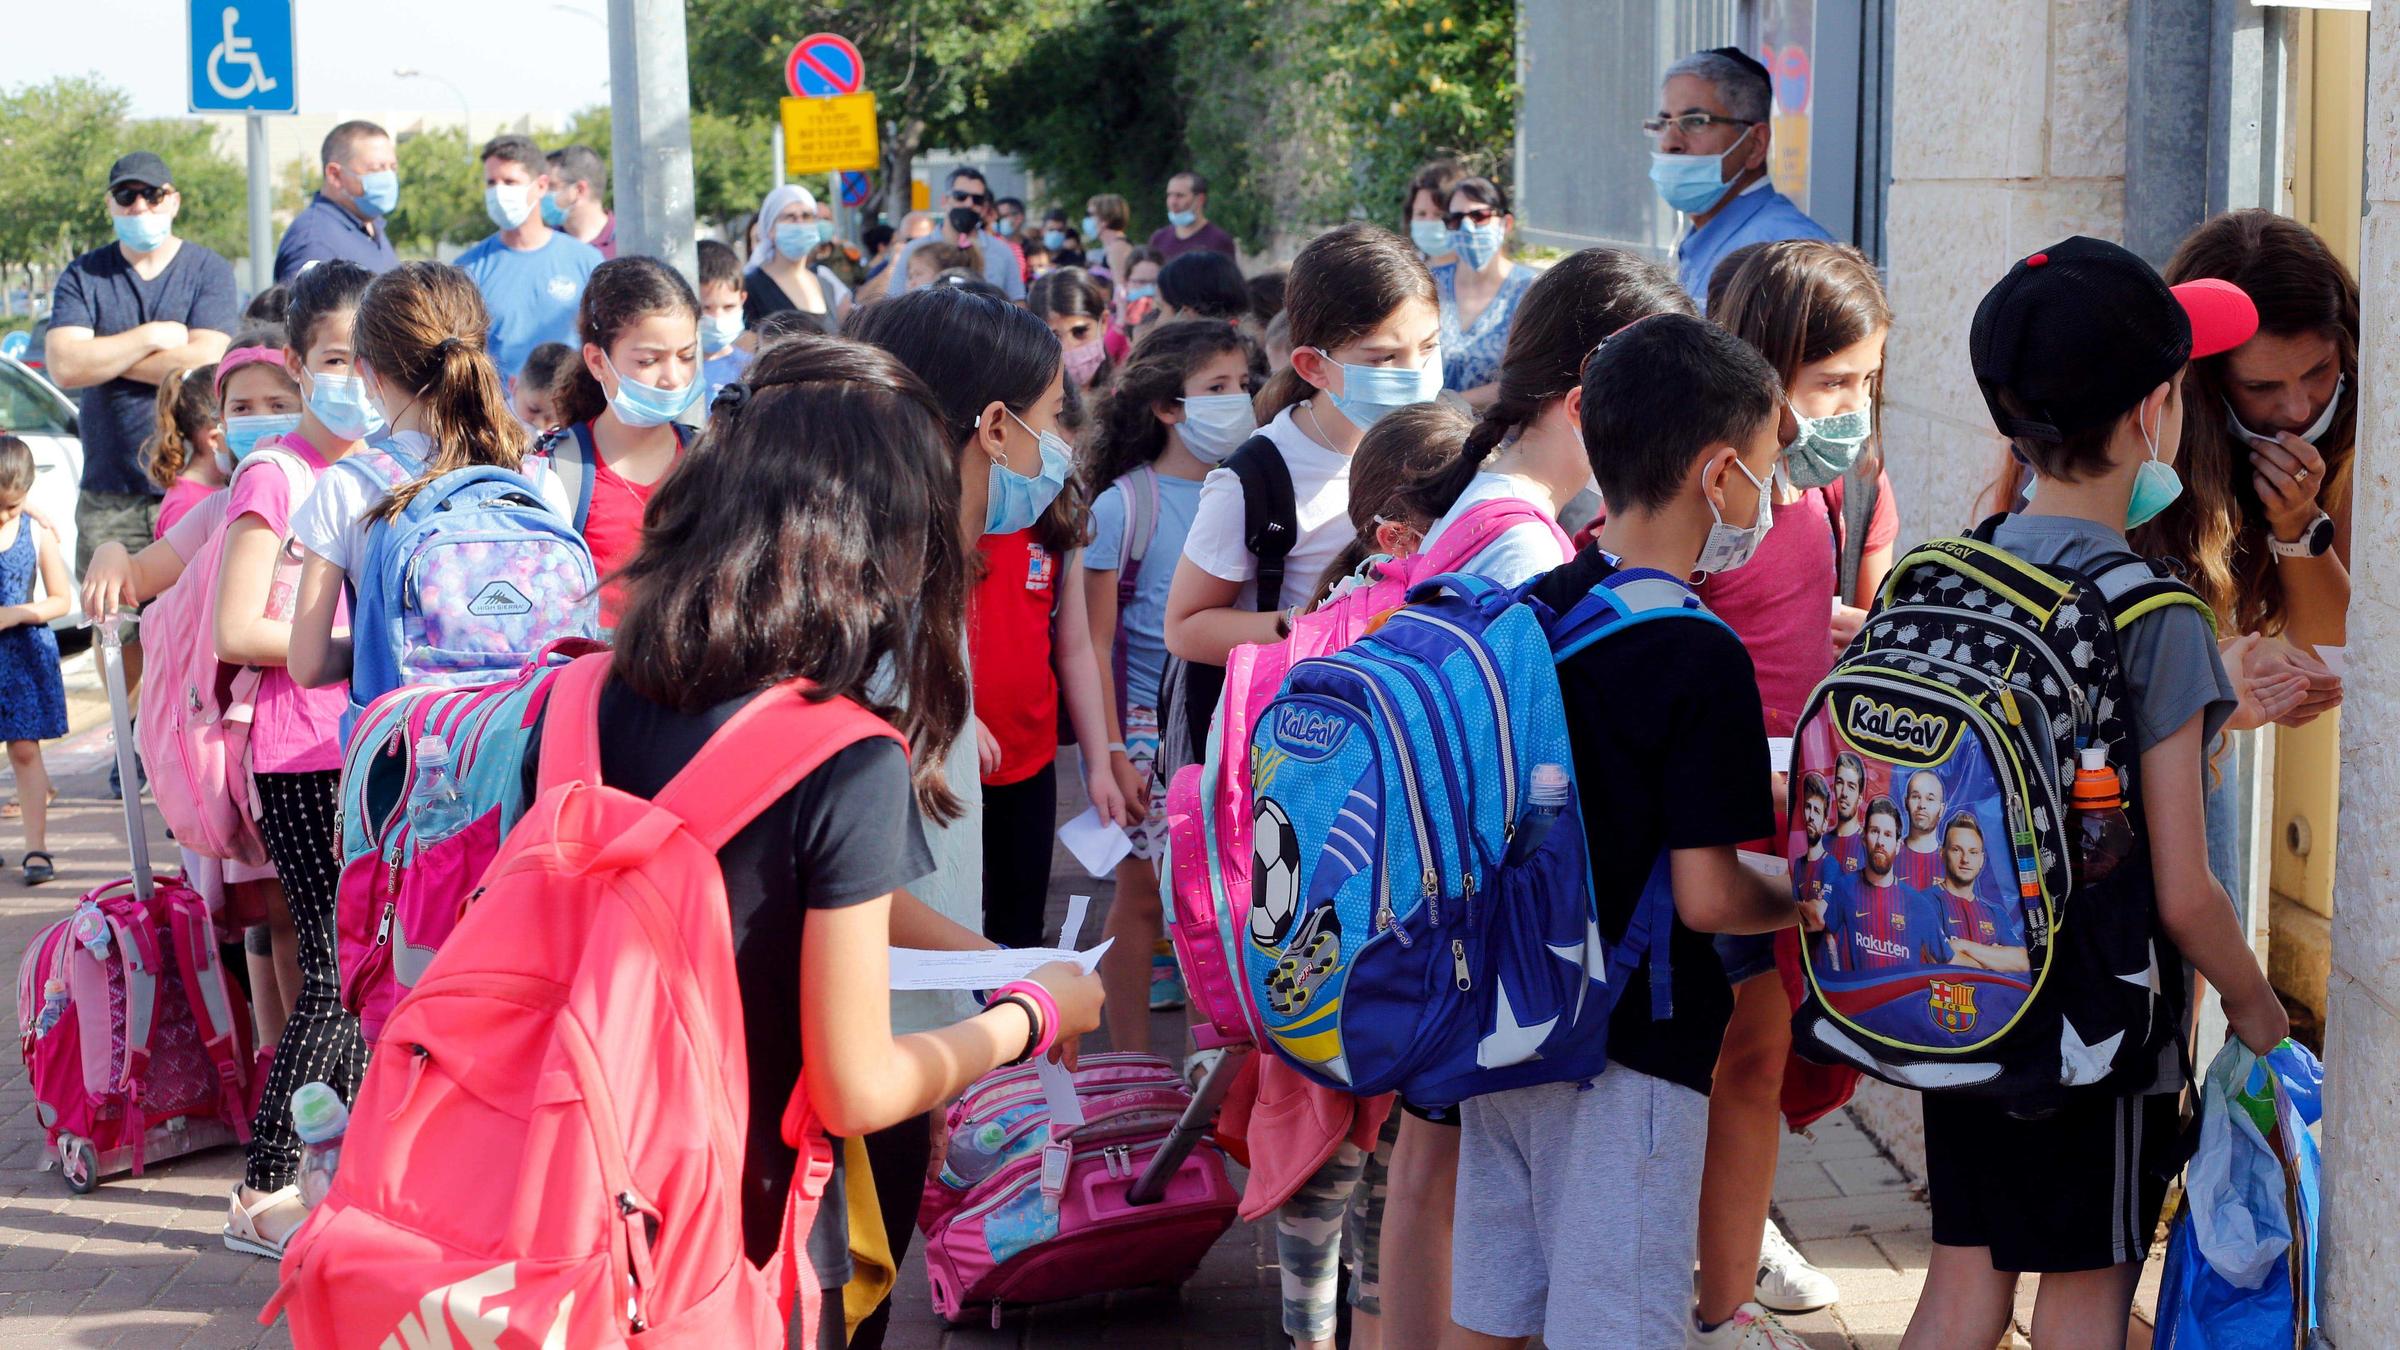 COVID-19: Over 120 schools in Israel close as staff, pupils test positive